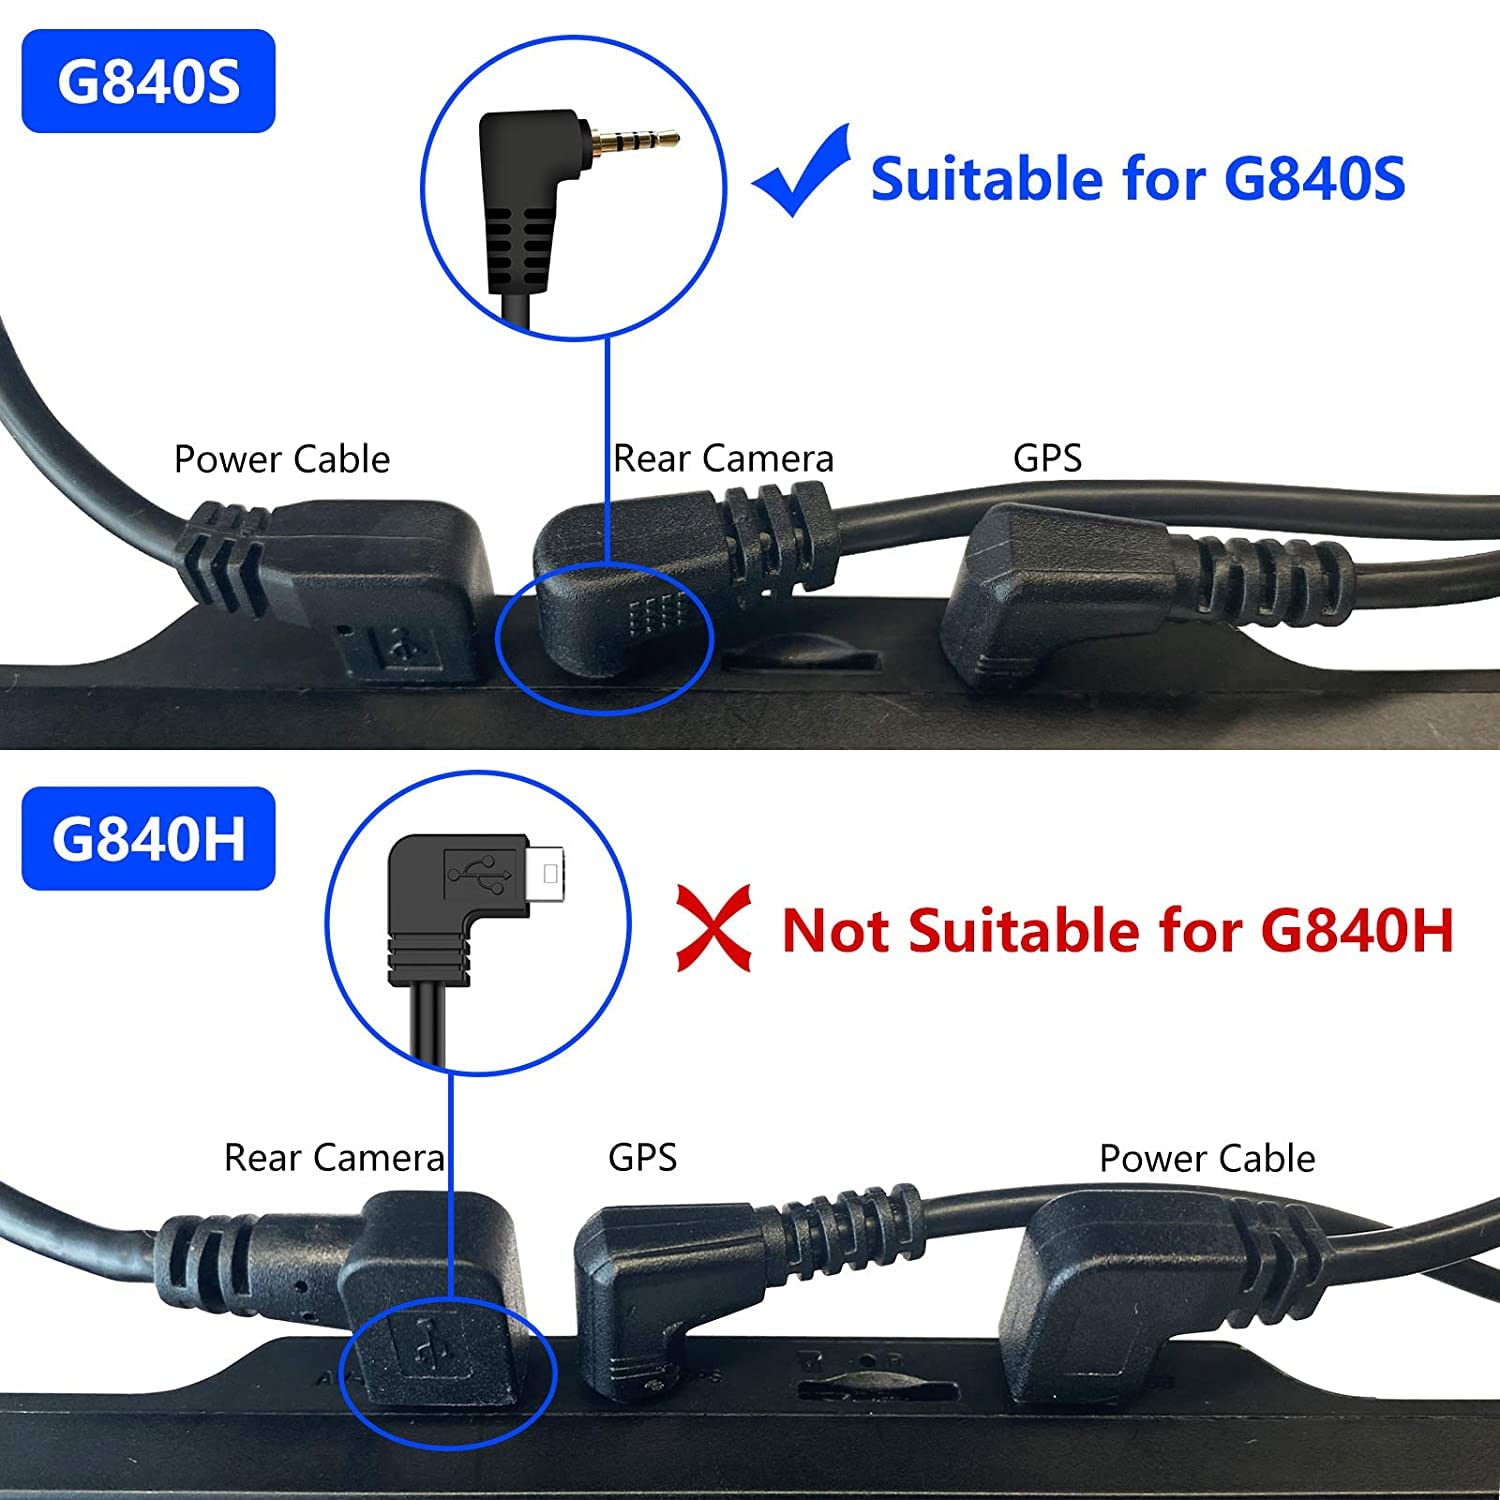 WOLFBOX 33Feet G840S / G930 / G910 / G840H / G850 / G900 / T10 Plus Rear Camera Extension Cord Cable (4 pin,2.5mm), not Suitable for G700 / G880